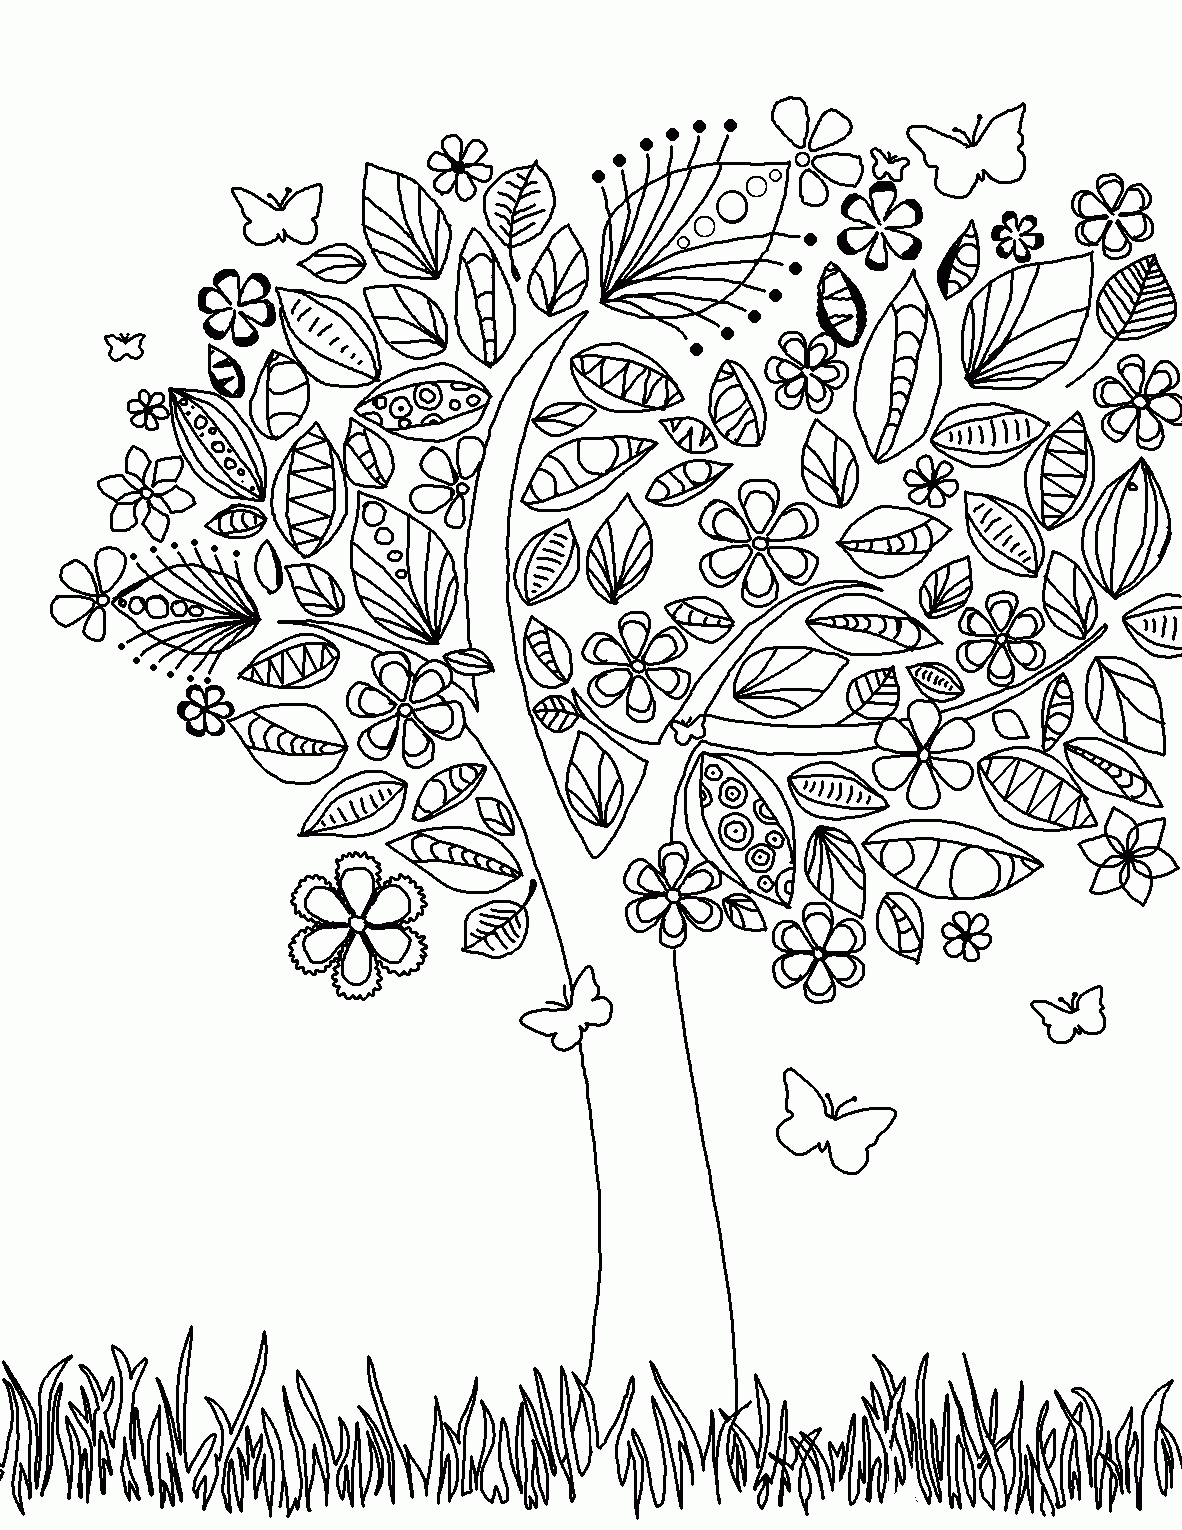 Free Printable Abstract Coloring Pages - VoteForVerde.com